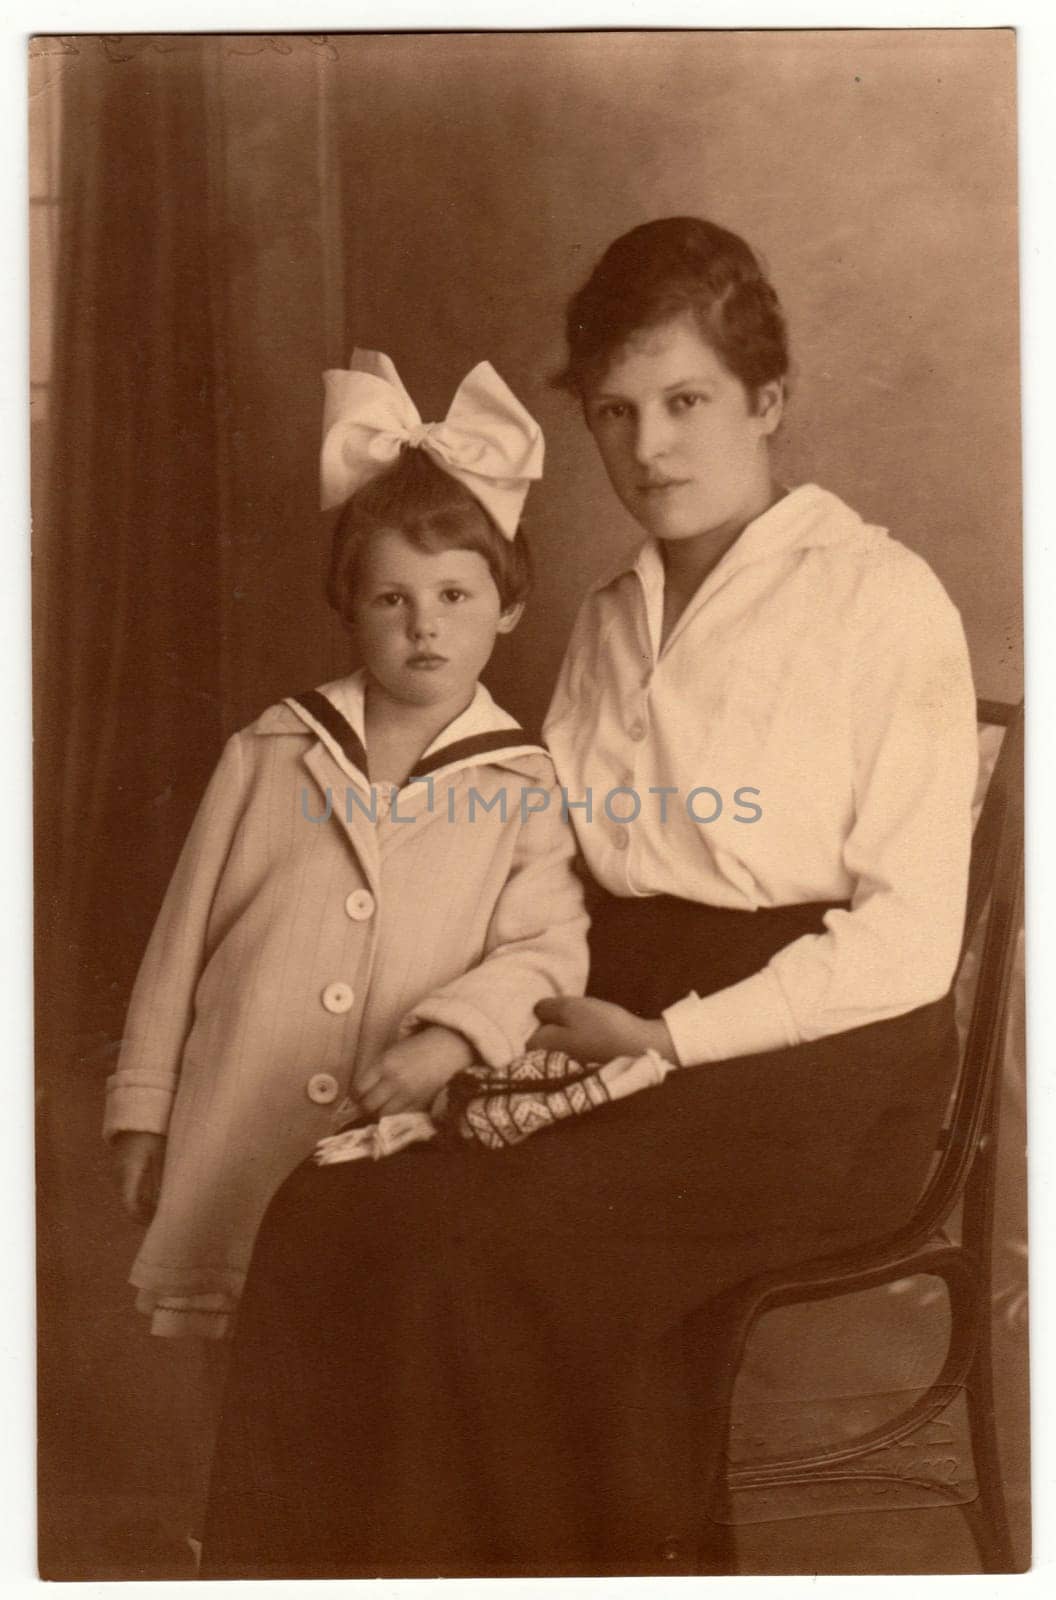 THE CZECHOSLOVAK REPUBLIC - 1919: Vintage photo shows woman with her small daughter. Retro black and white studio phortography. Circa 1920s.